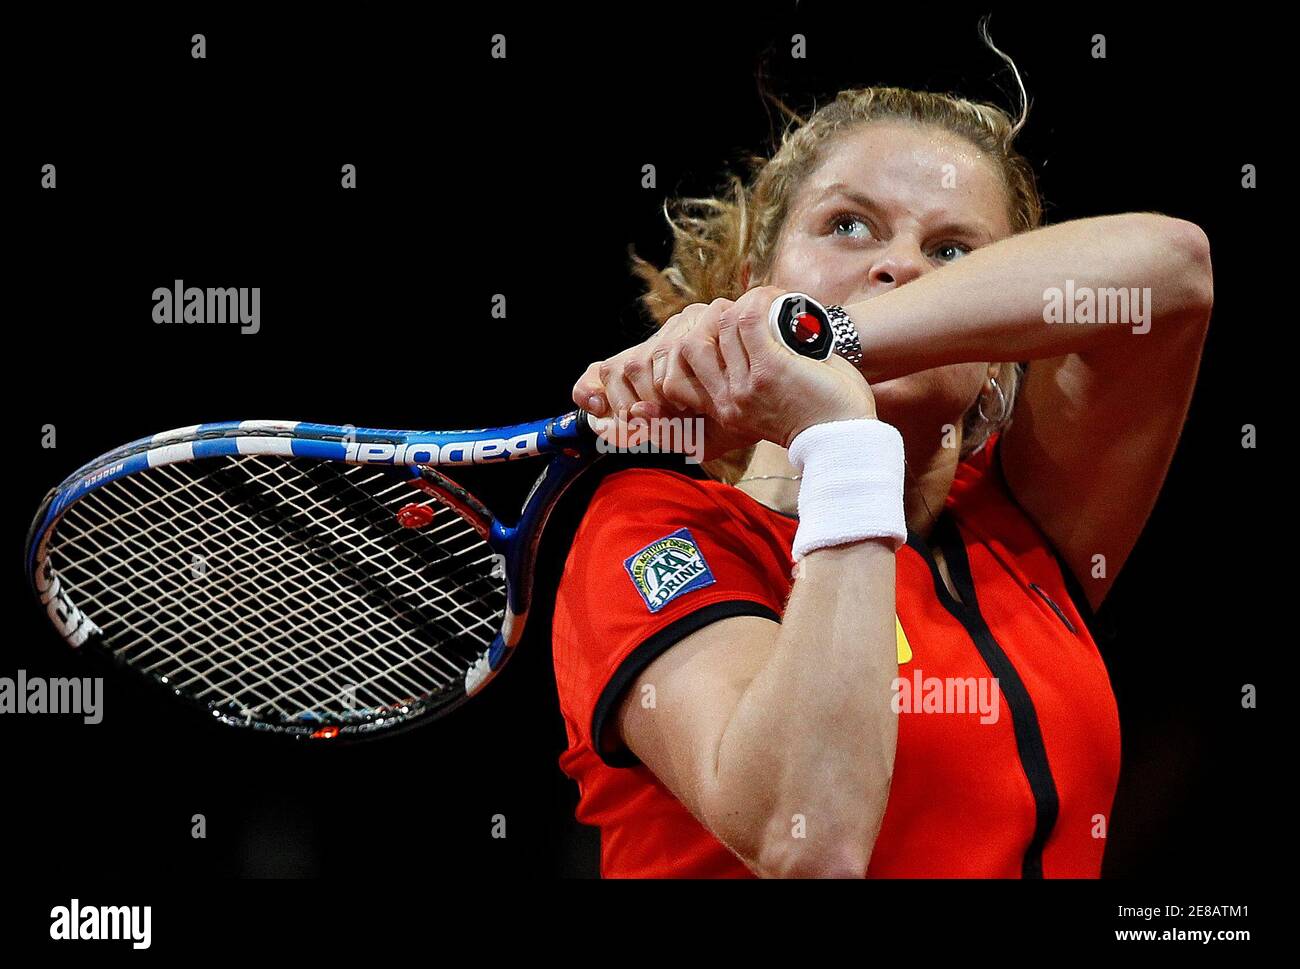 Belgium's Kim Clijsters returns plays against Estonia's Maret Ani during  their Fed Cup World Group play-off tennis match in Hasselt, April 24, 2010.  REUTERS/Yves Herman (BELGIUM - Tags: SPORT TENNIS Stock Photo -